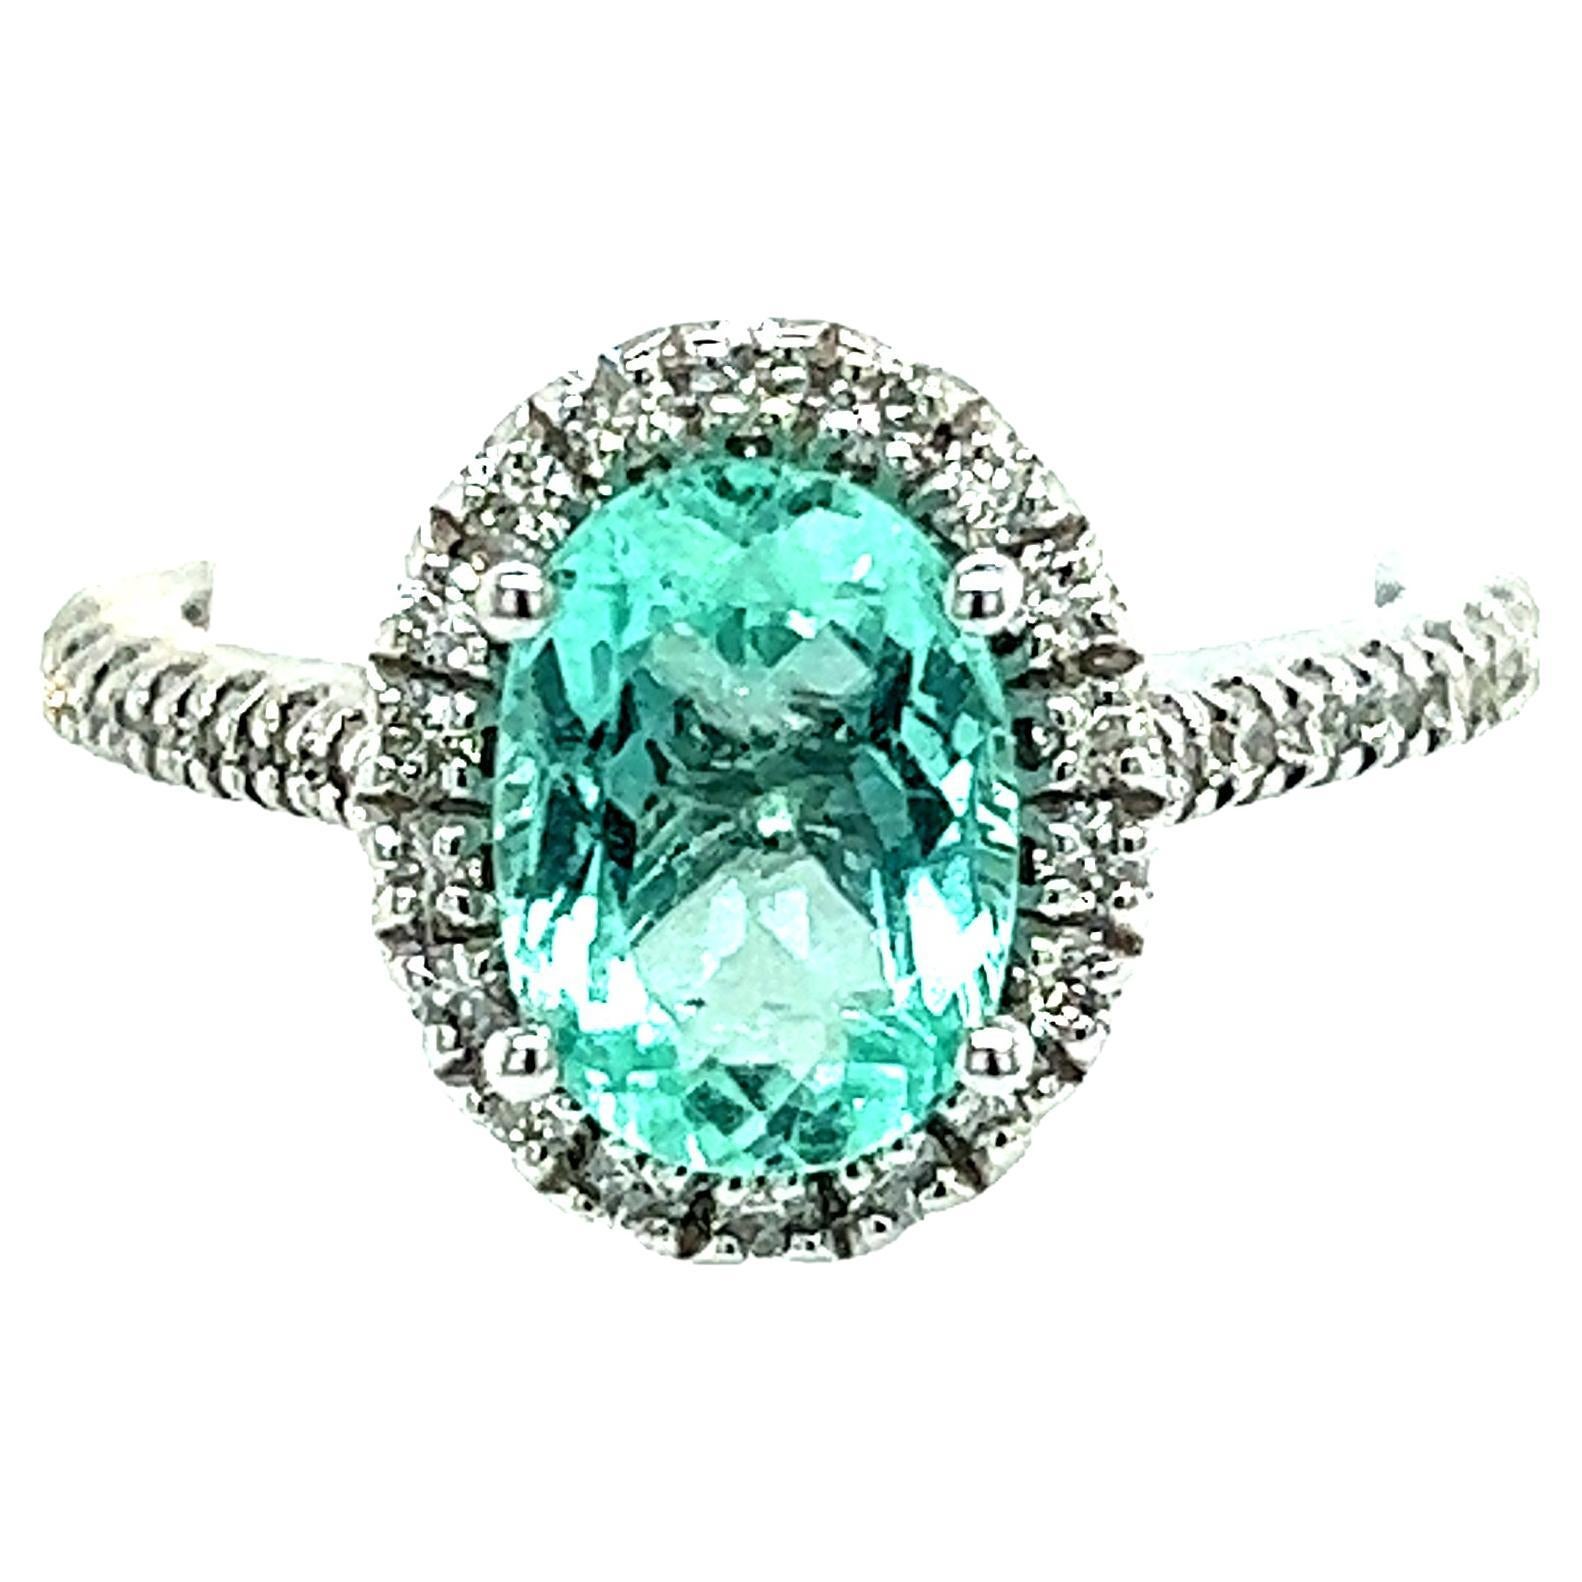 Natural Colombian Emerald Diamond Ring Size 6.5 14k W Gold 2.98 TCW Certified For Sale